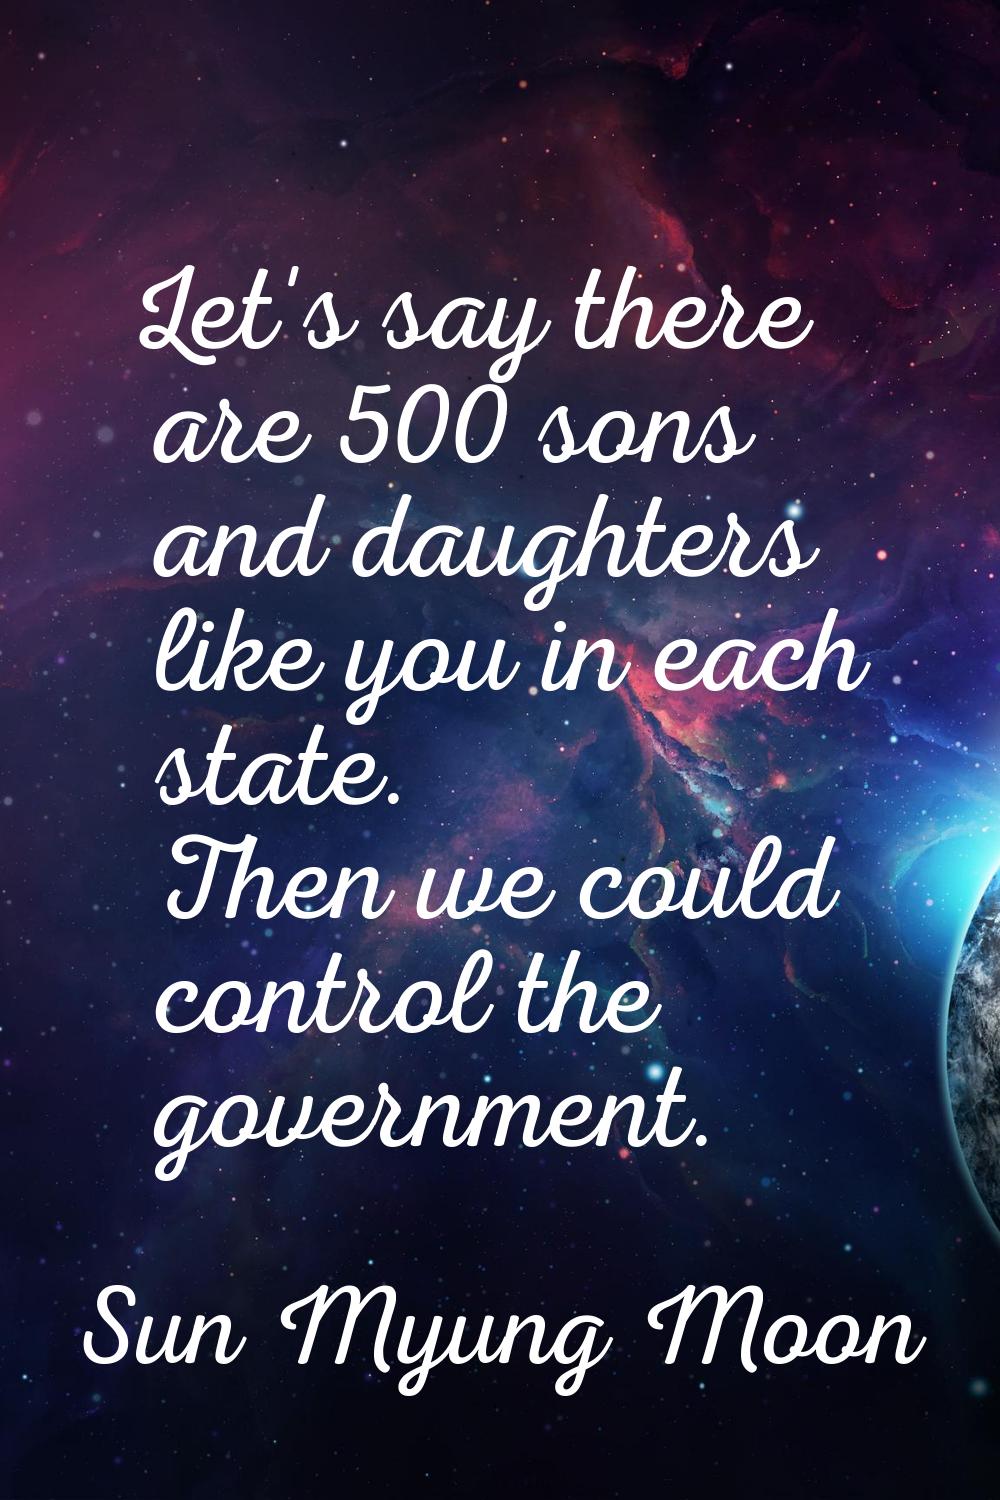 Let's say there are 500 sons and daughters like you in each state. Then we could control the govern